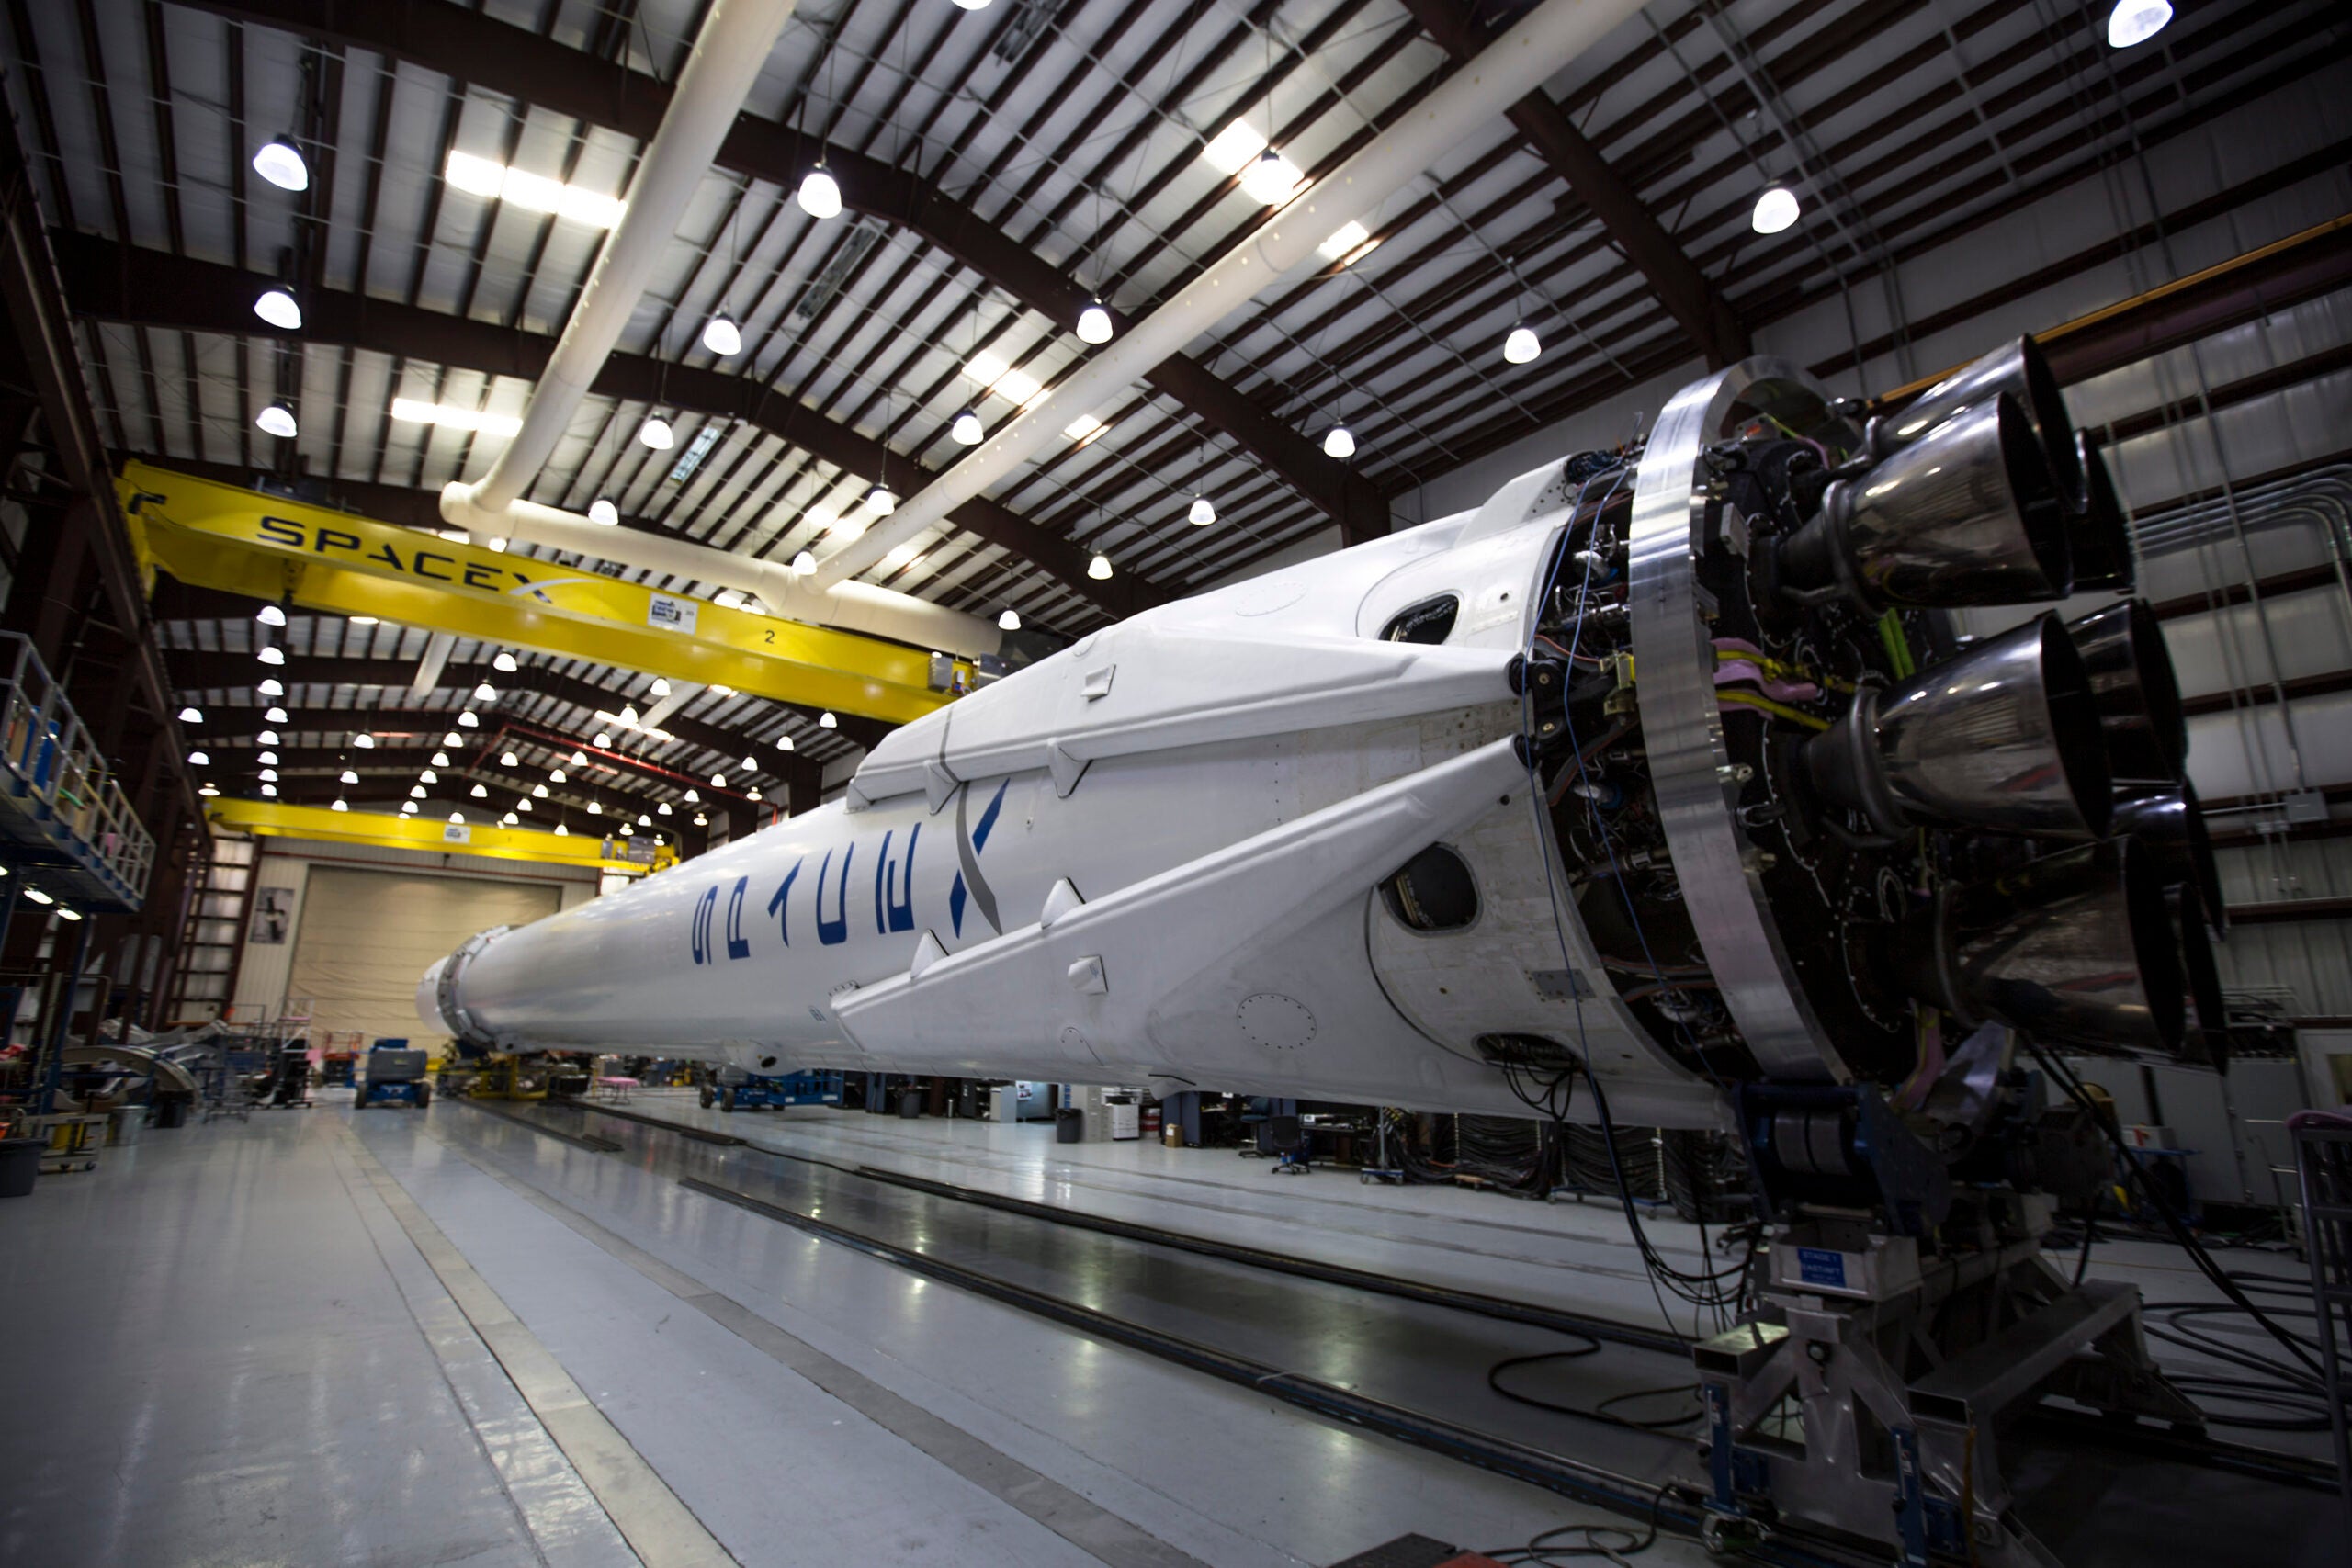 SpaceX Readies for First Launch Since Falcon 9 Explosion